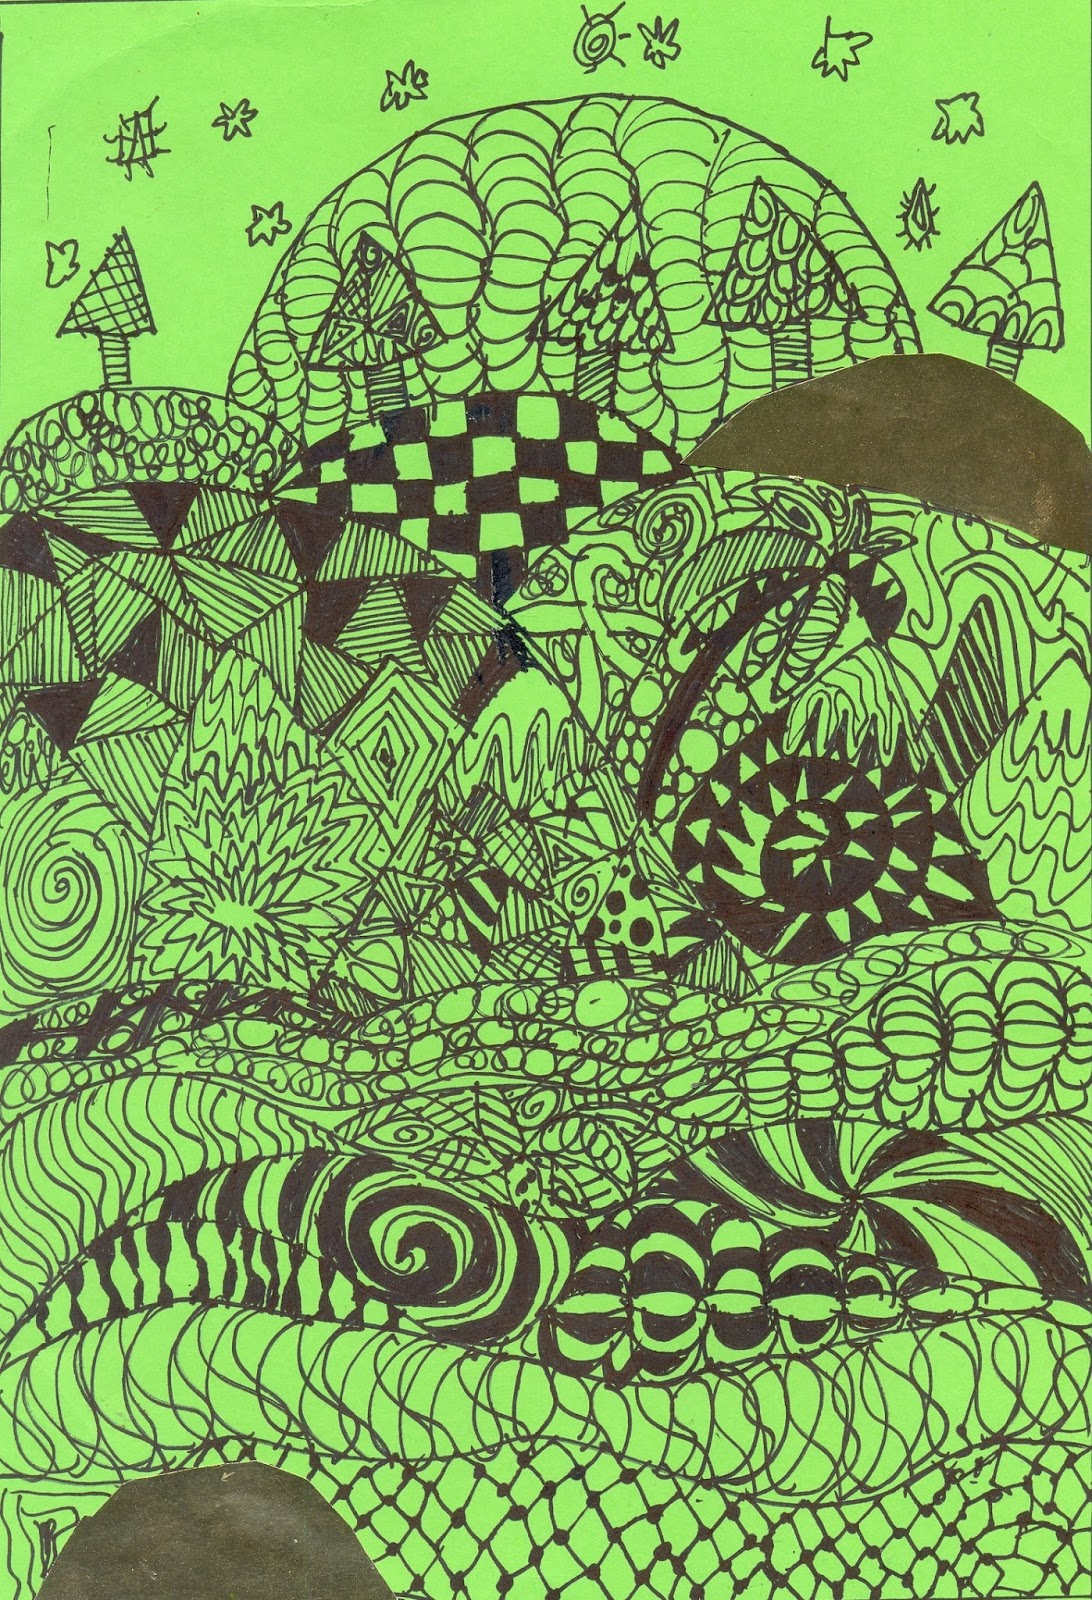 in the art room: Zentangle Landscapes with Gold